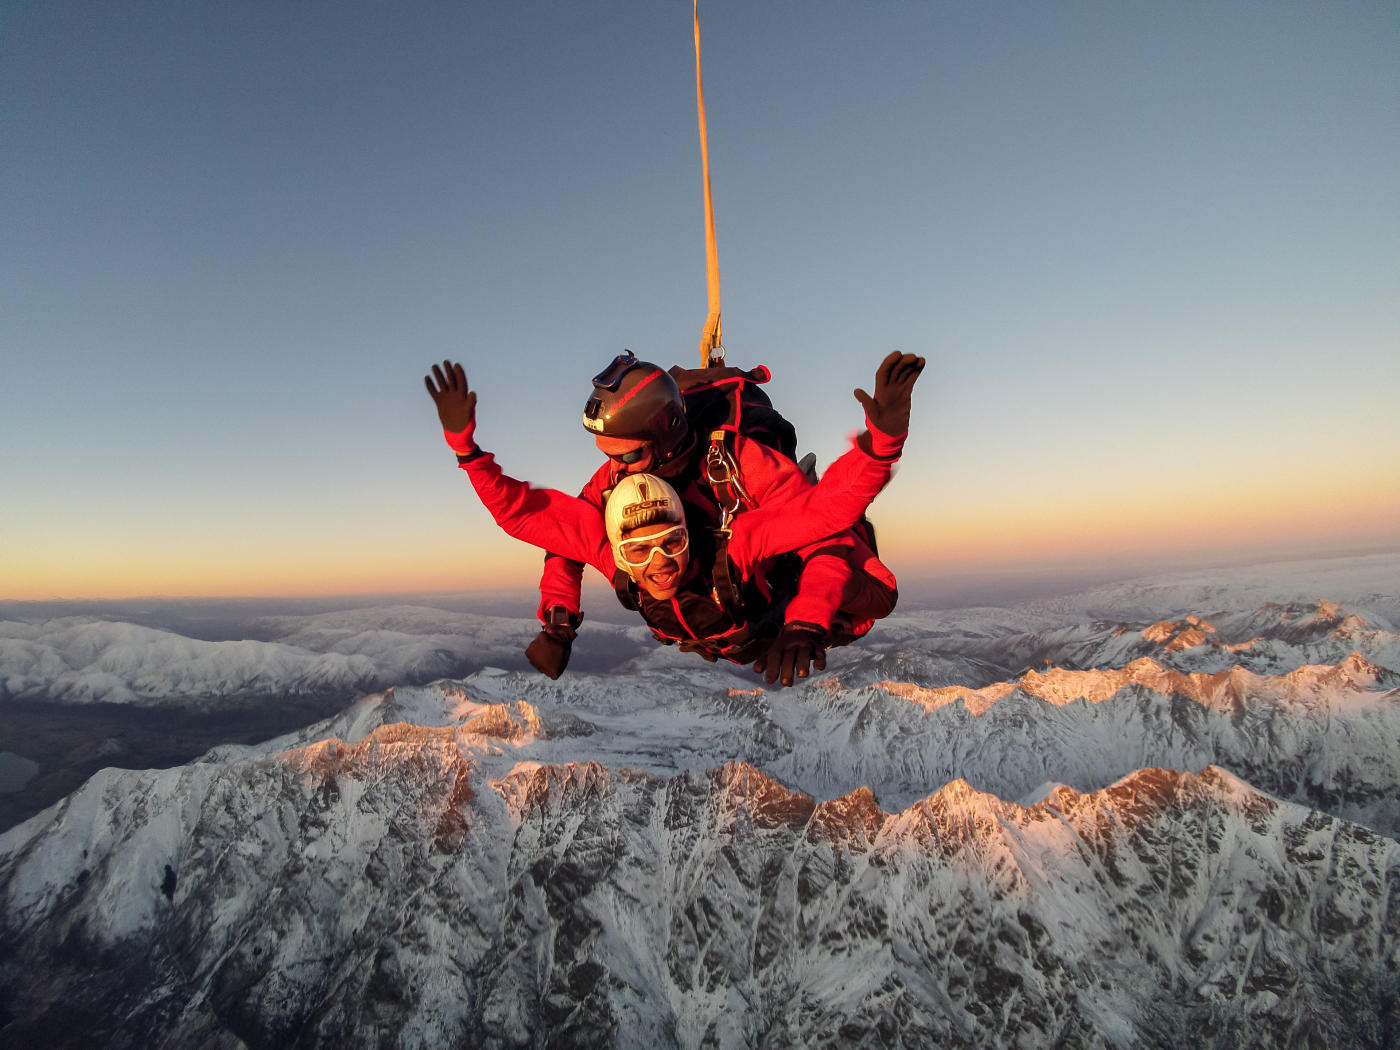 Tandem skydiving over snowy mountains